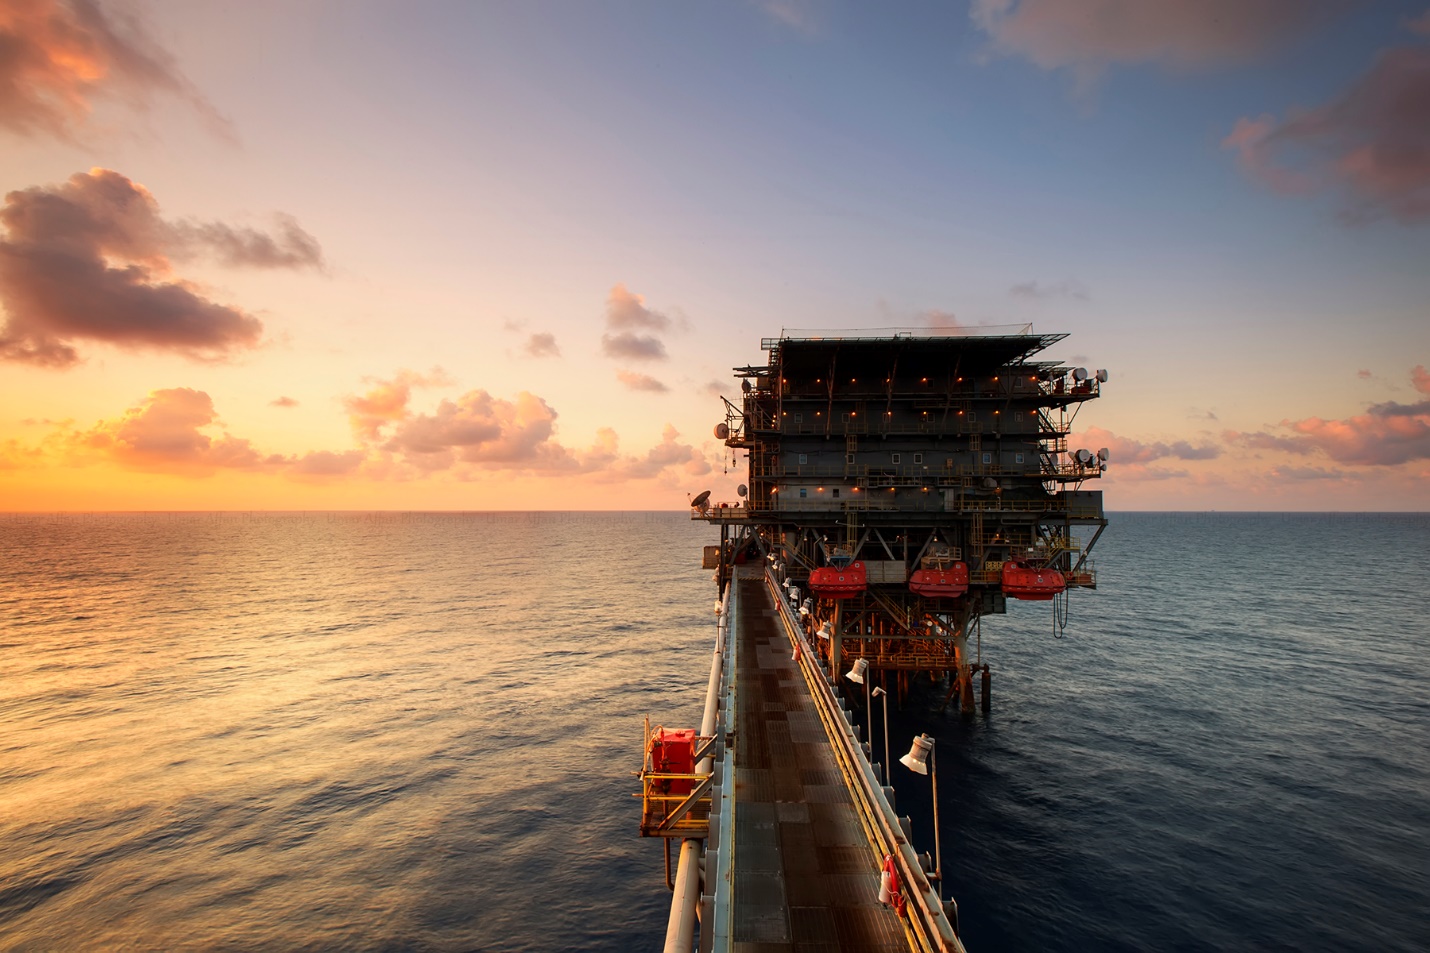 Injury Attorney for Offshore Oil Workers in Pesos, Texas